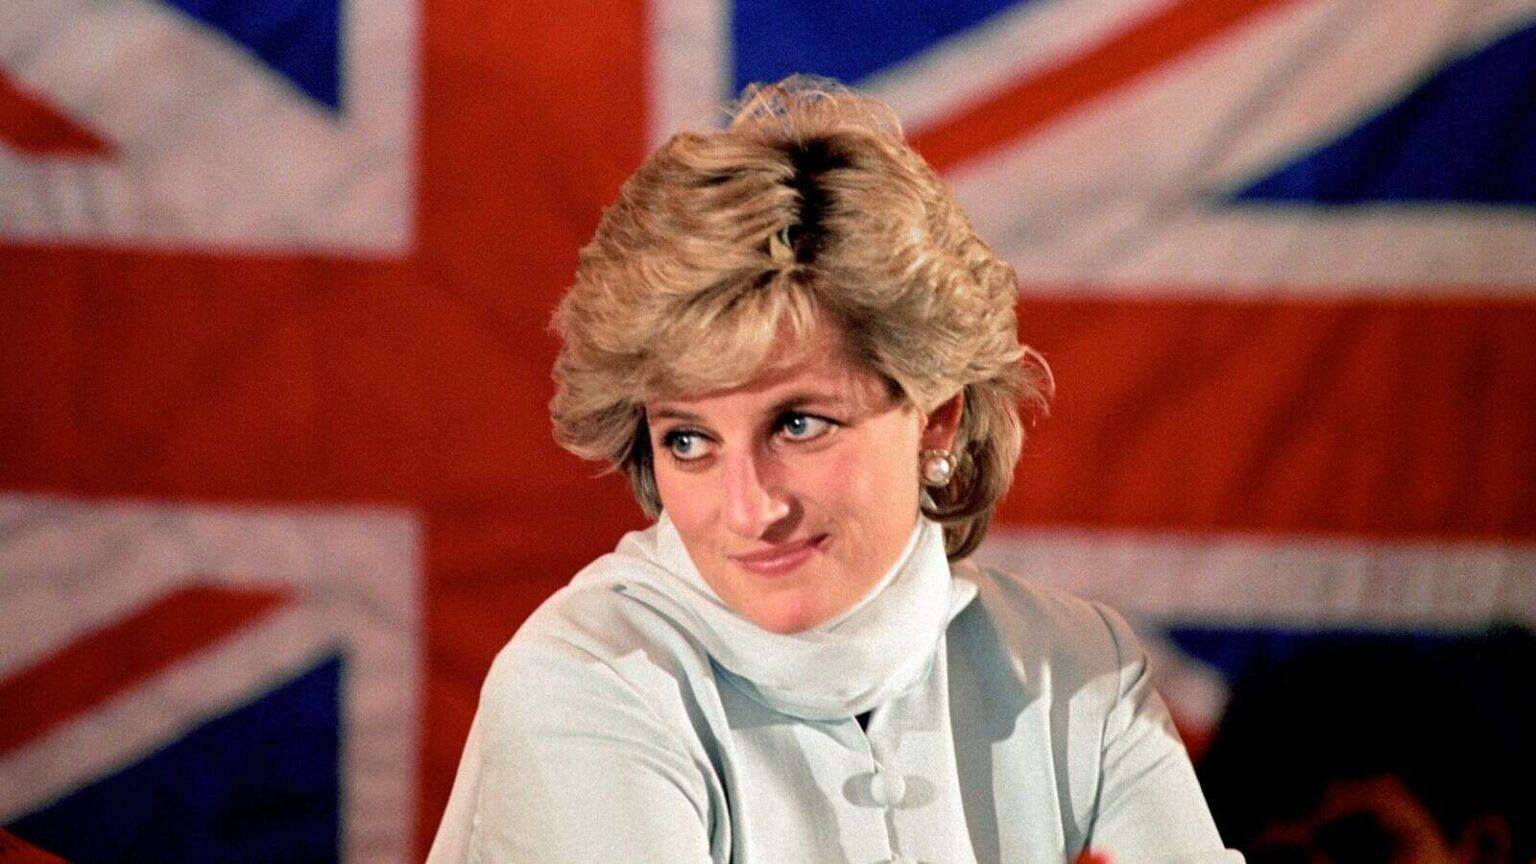 Remembering Princess Diana, who said she wanted to be ‘Queen of people’s hearts’